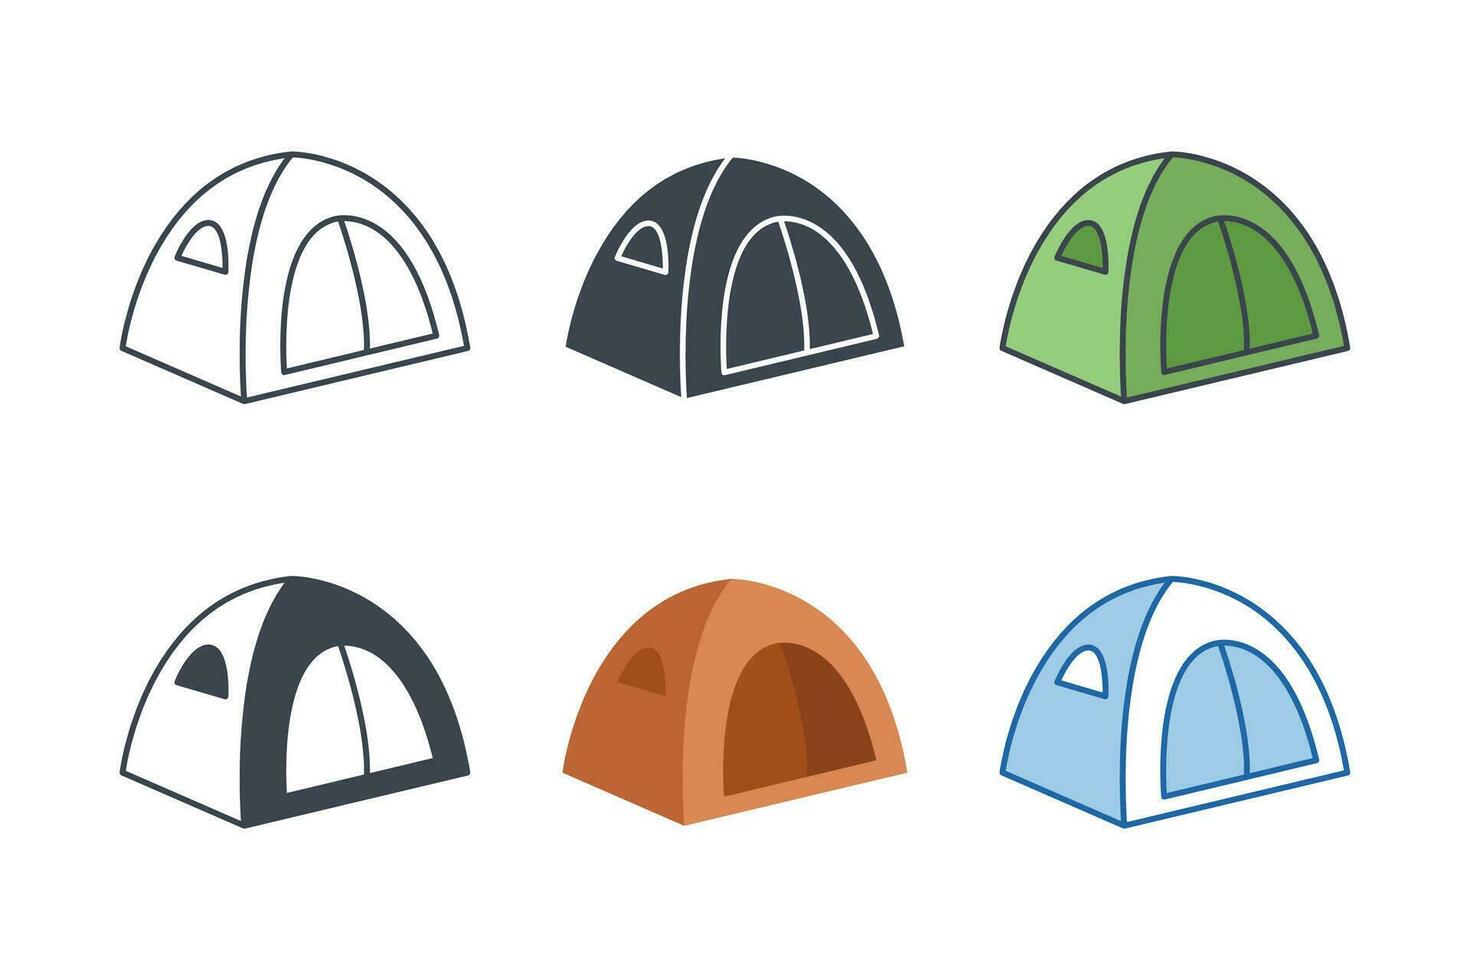 Tent icon collection with different styles. Tent icon symbol vector illustration isolated on white background